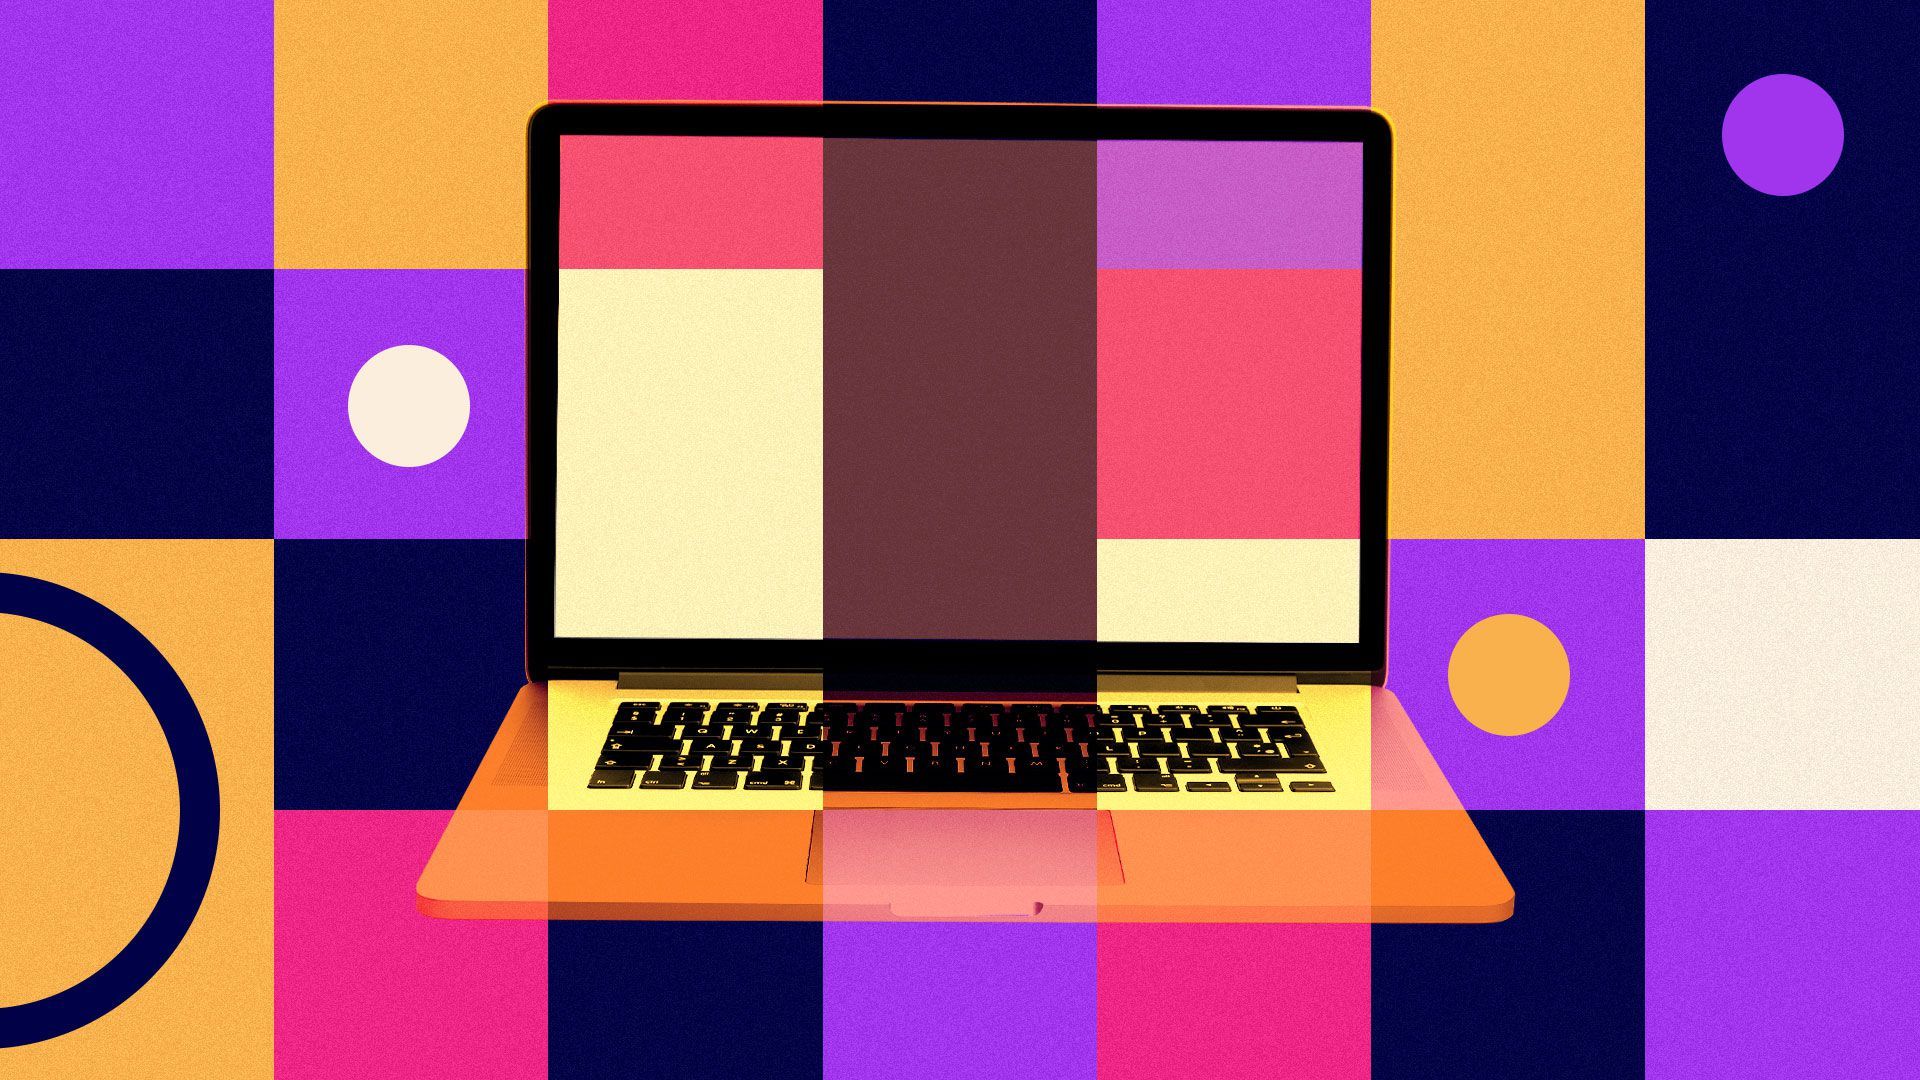 Illustration of open laptop with a grid background and circles.